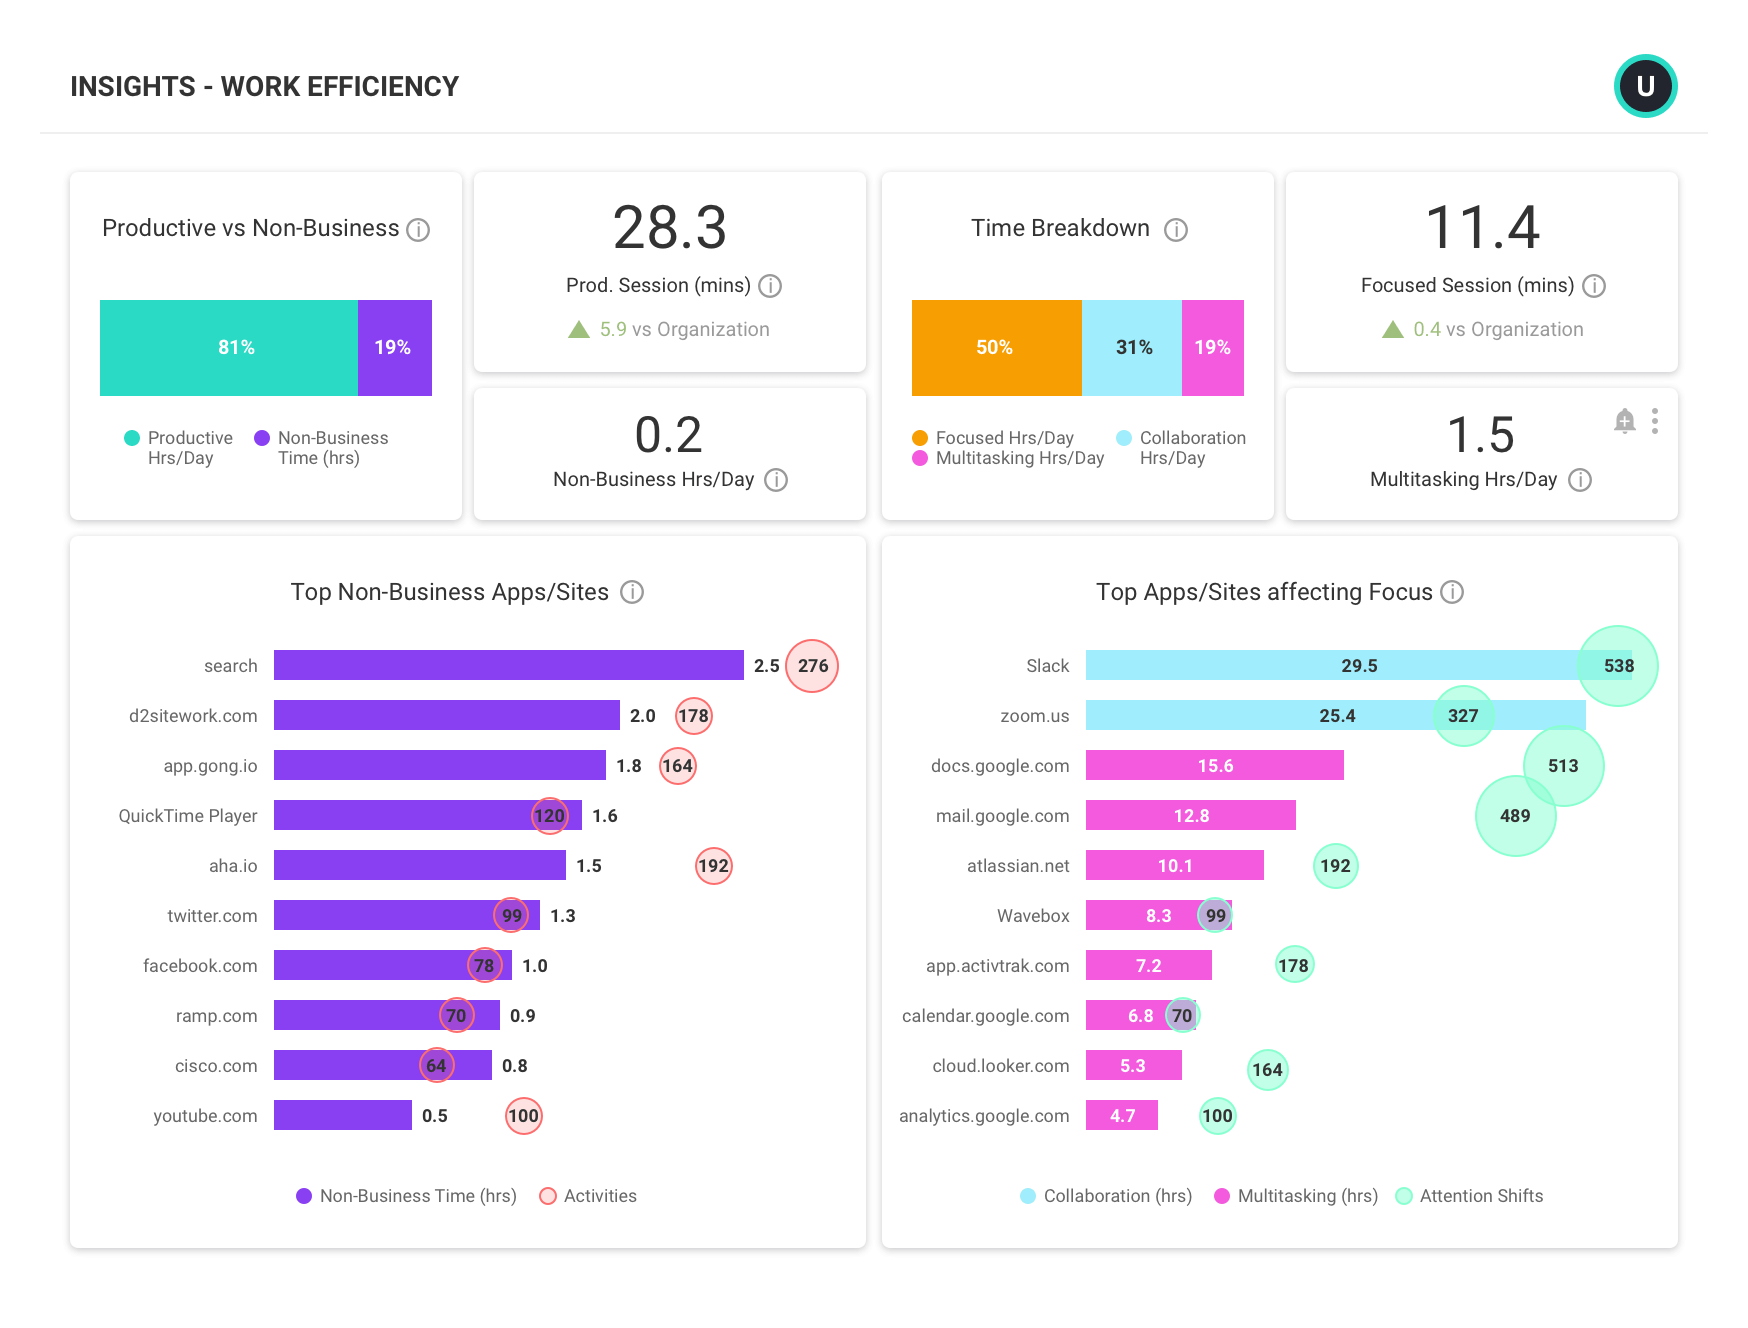 An Insights - Work Efficiency report showing total time breakdown, productive time breakdown and top non business apps/sites.